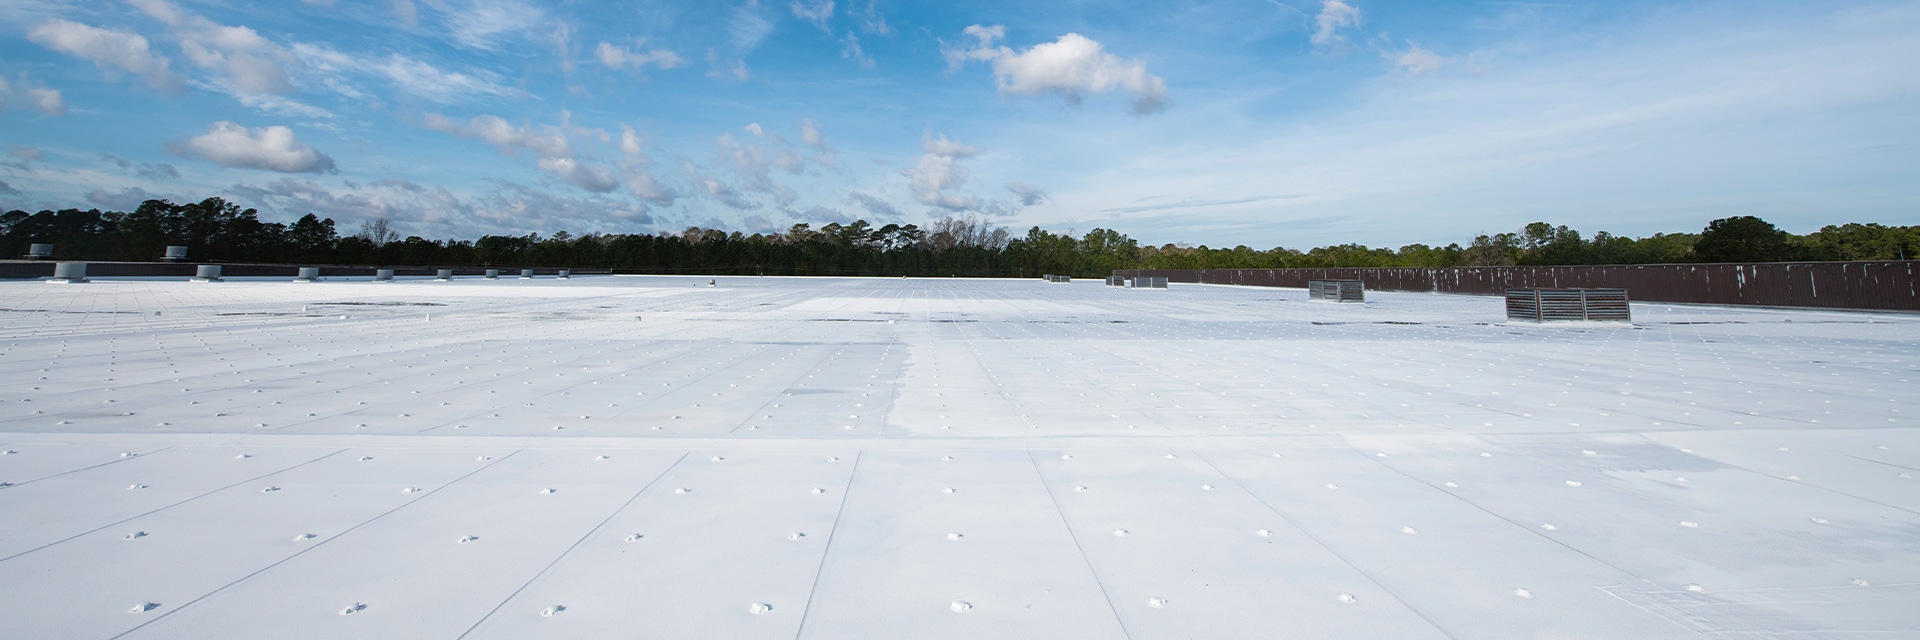 Building with a white, flat roof with GAF commercial roofing materials